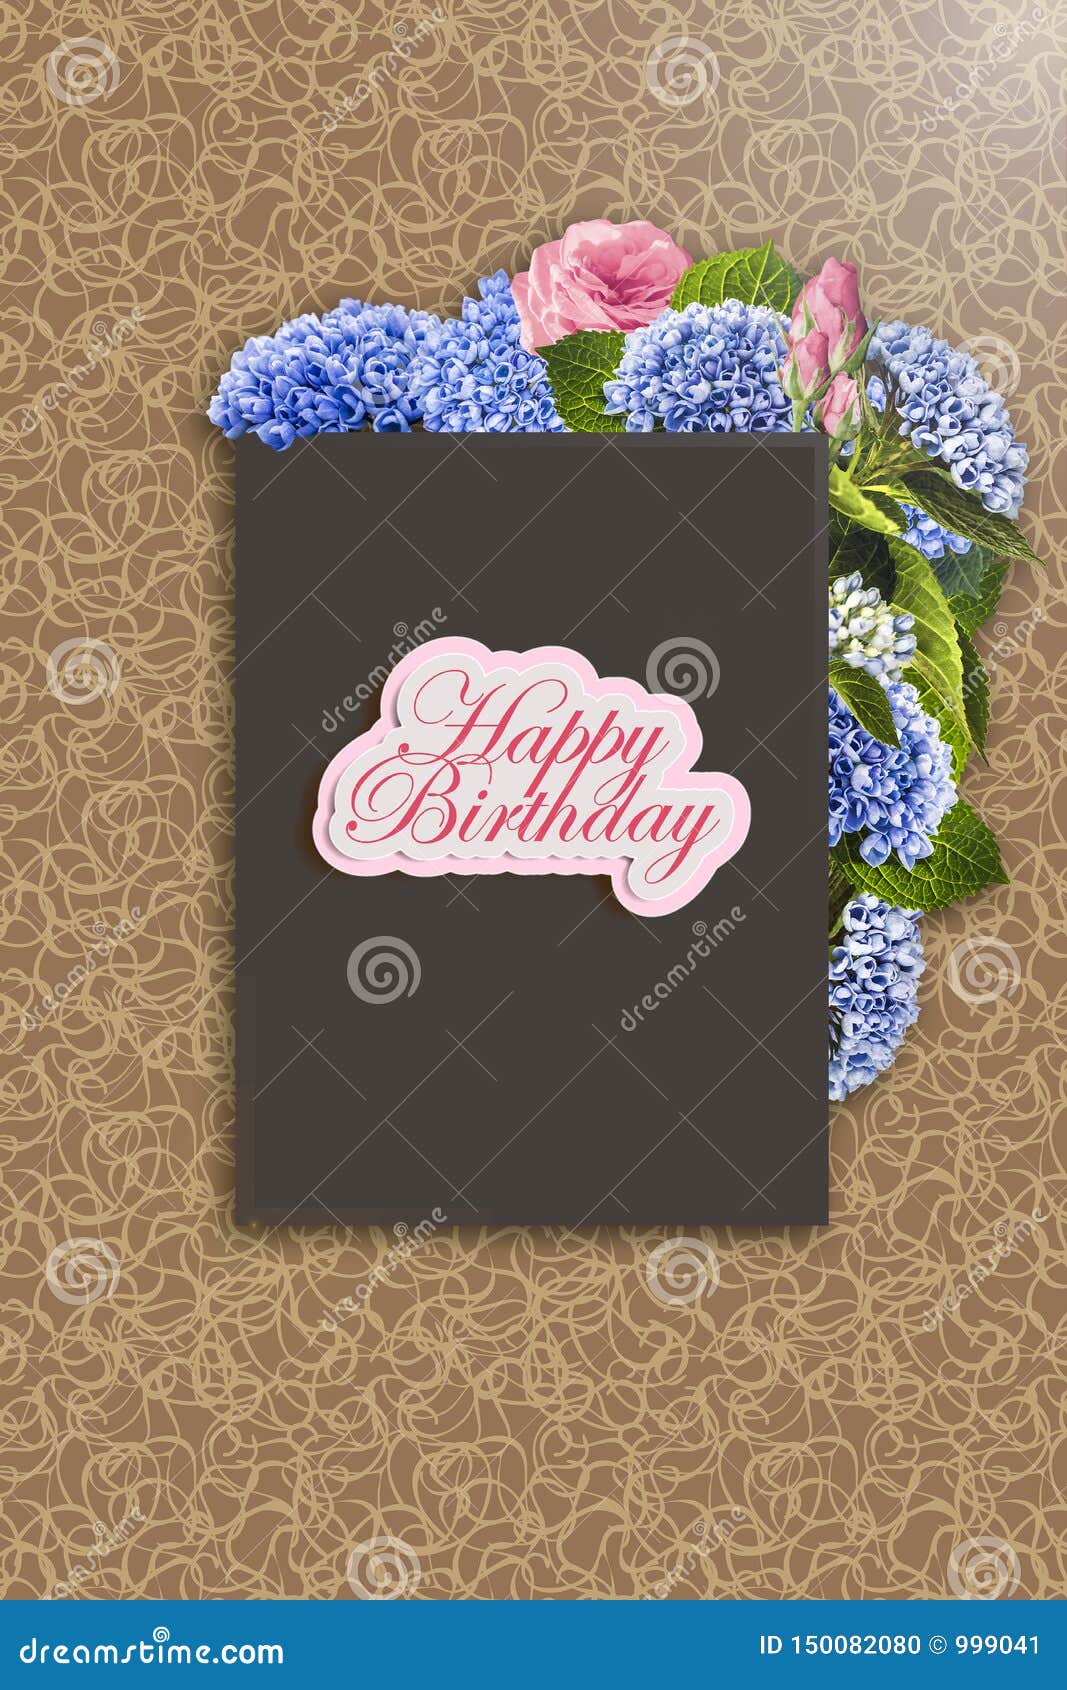 Happy Birthday - Card. Floral Frame with Hydrangea, Rose and ...